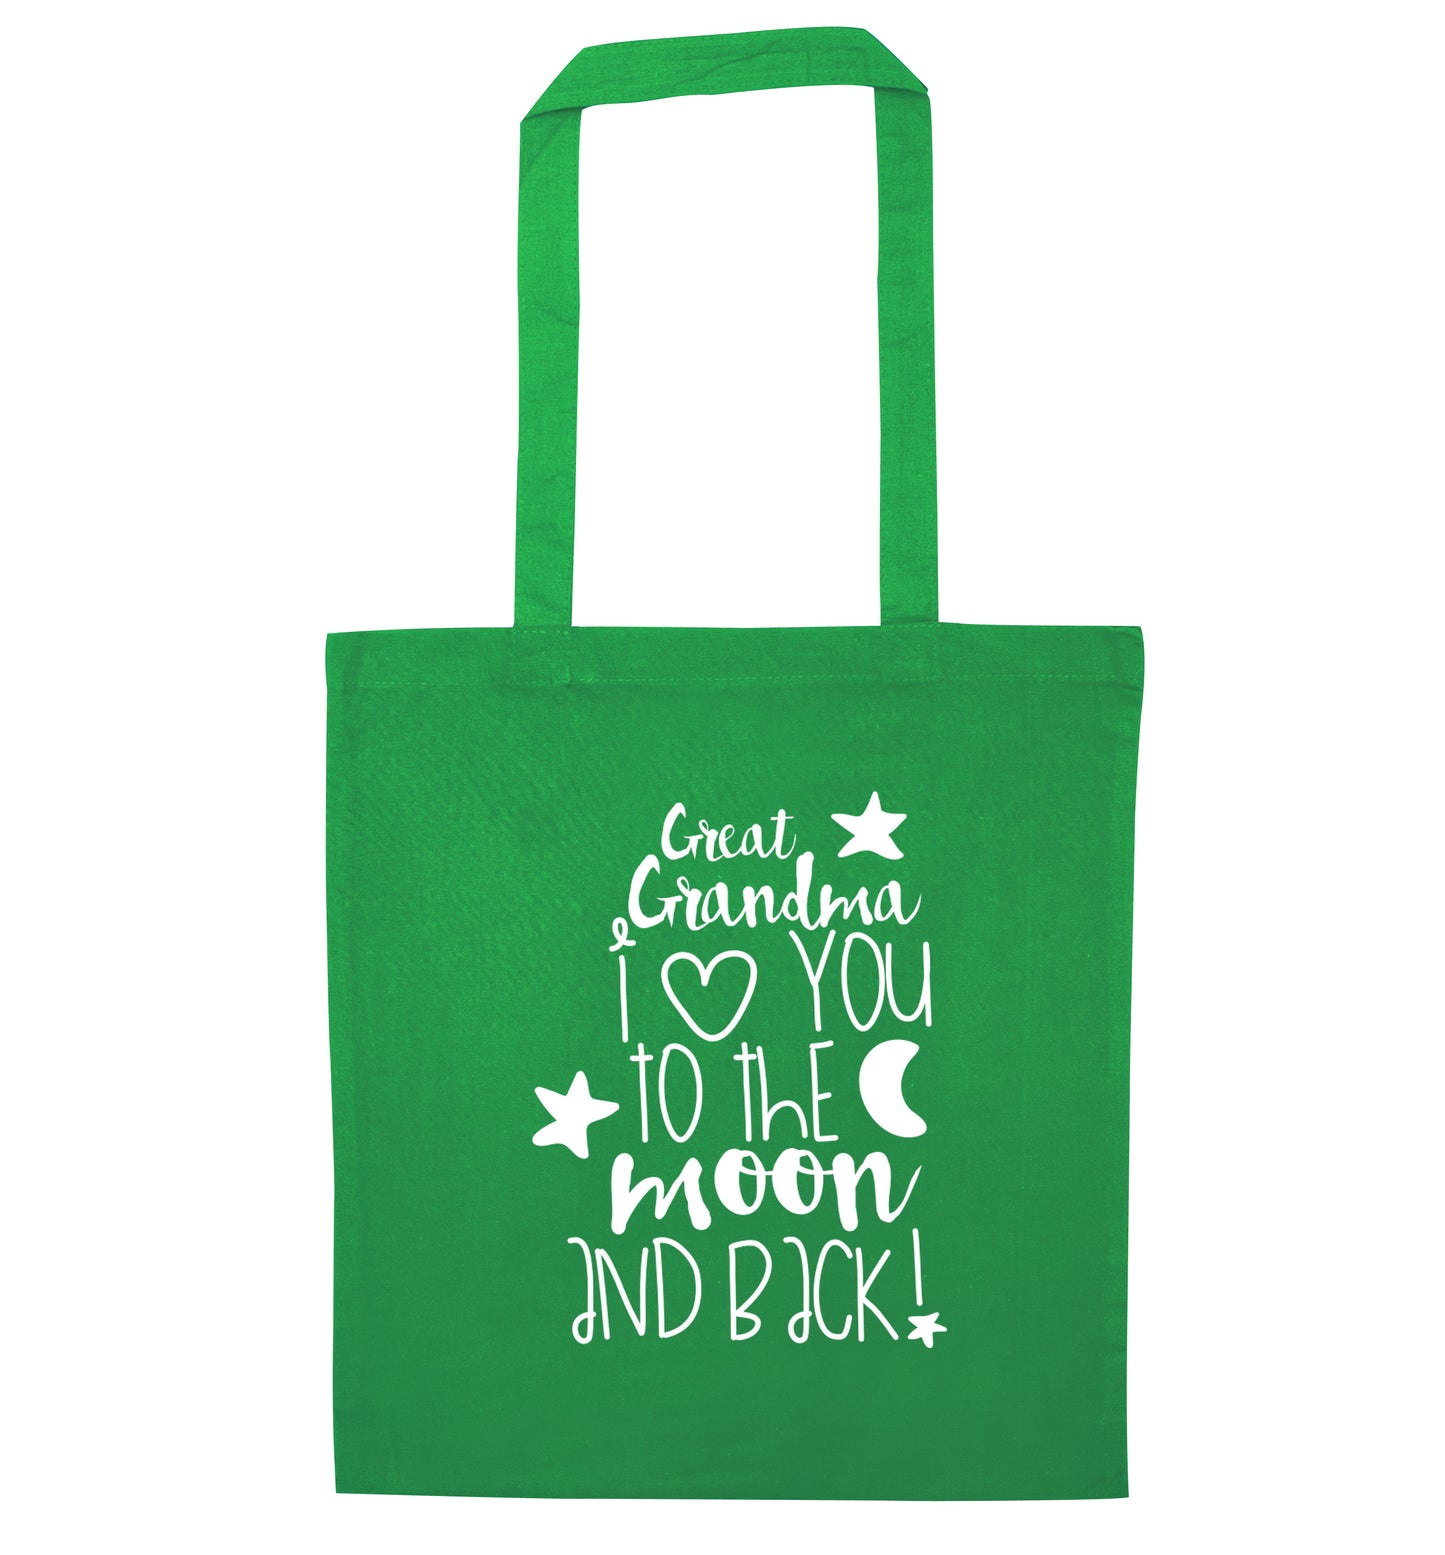 Great Grandma I love you to the moon and back green tote bag